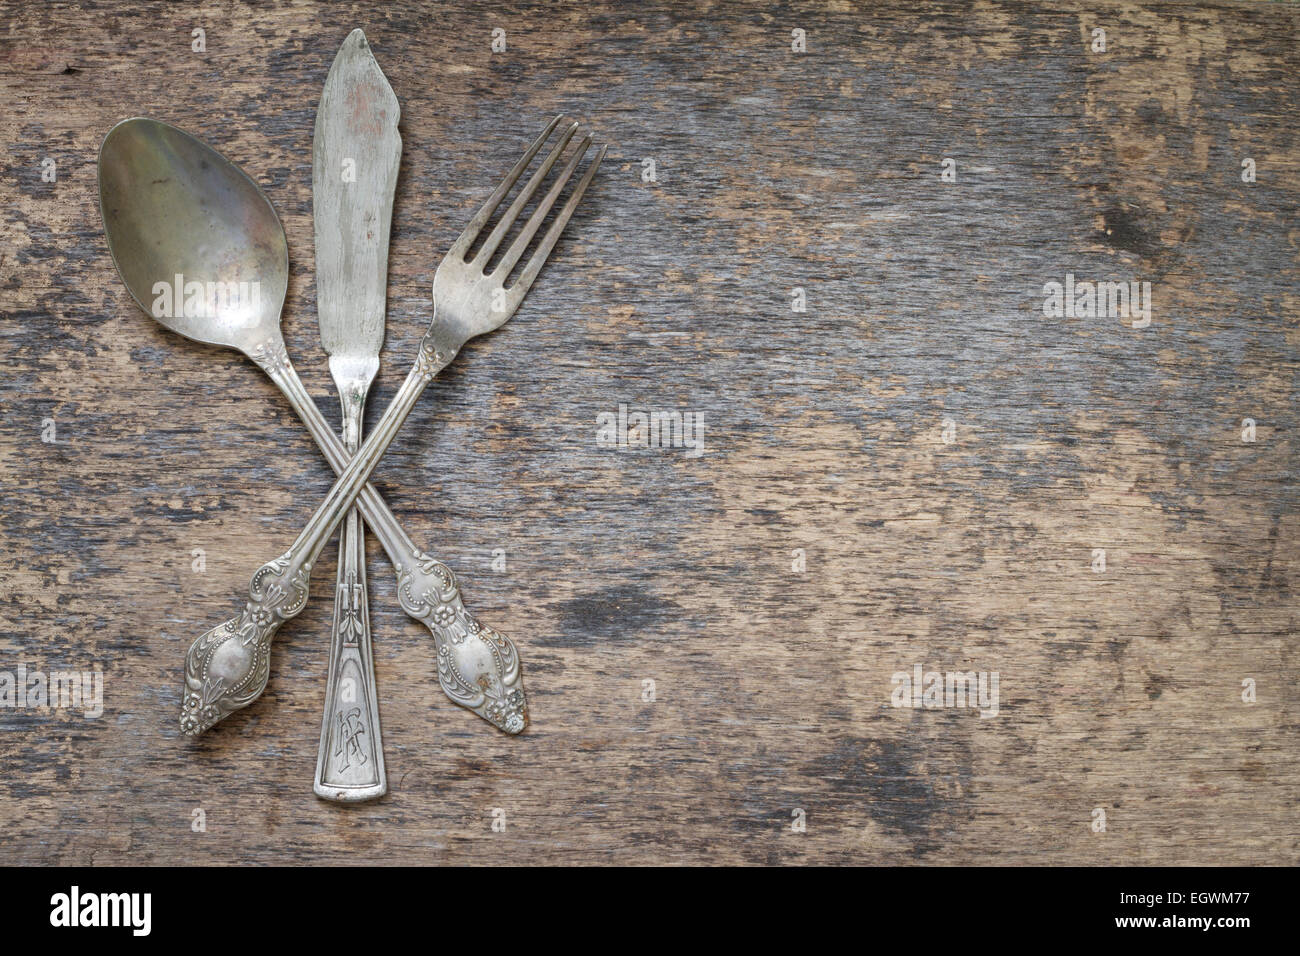 Old vintage cutlery and dishware abstract food background Stock Photo